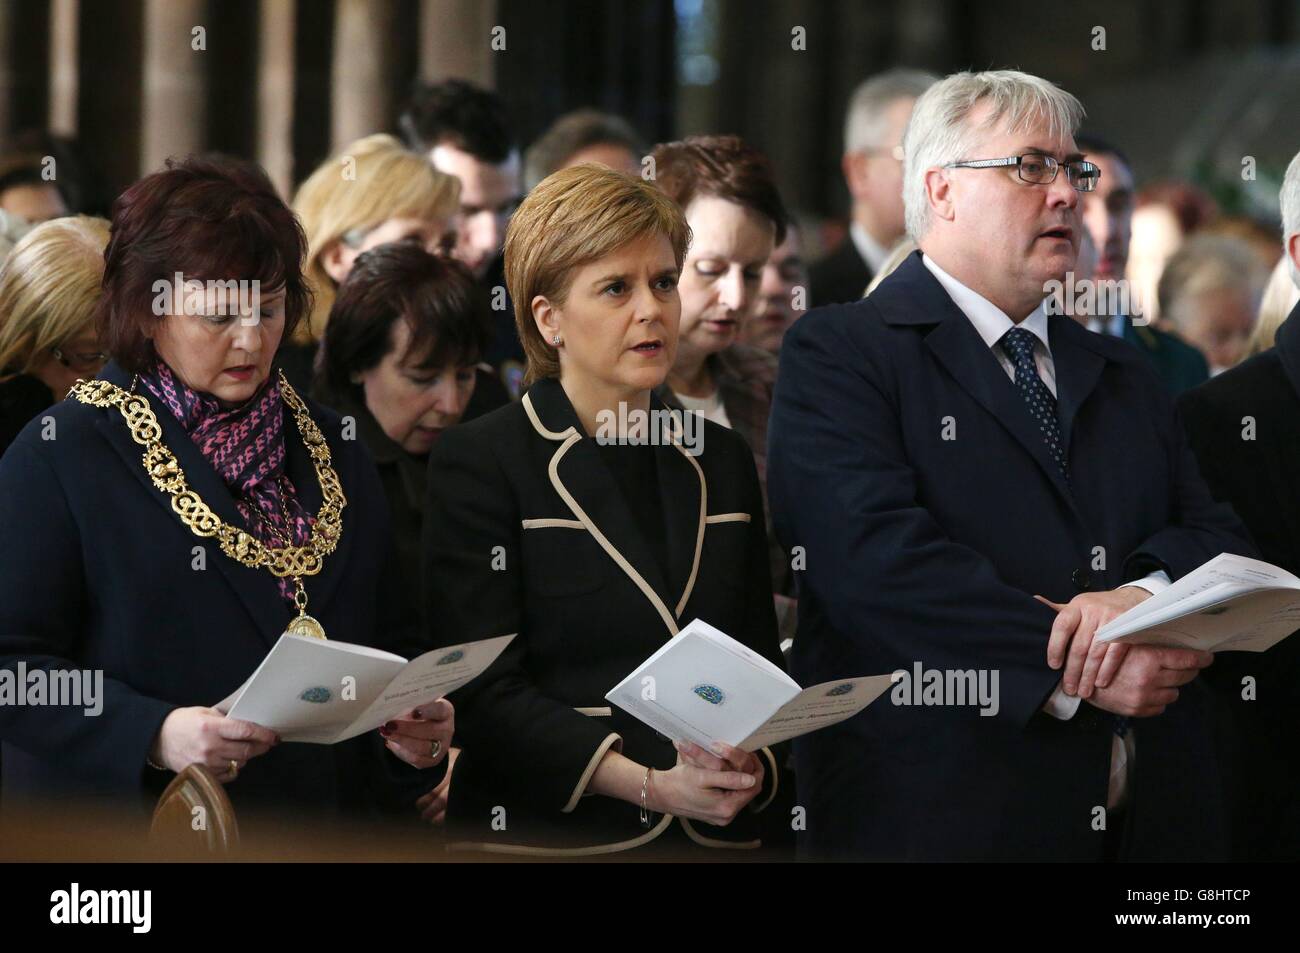 (Left to right) Glasgow Lord Provost Sadie Docherty, First Minister Nicola Sturgeon and Glasgow City Council leader Frank McAveety attend a special service to mark the anniversary of the Glasgow bin lorry crash at Glasgow Cathedral. Stock Photo